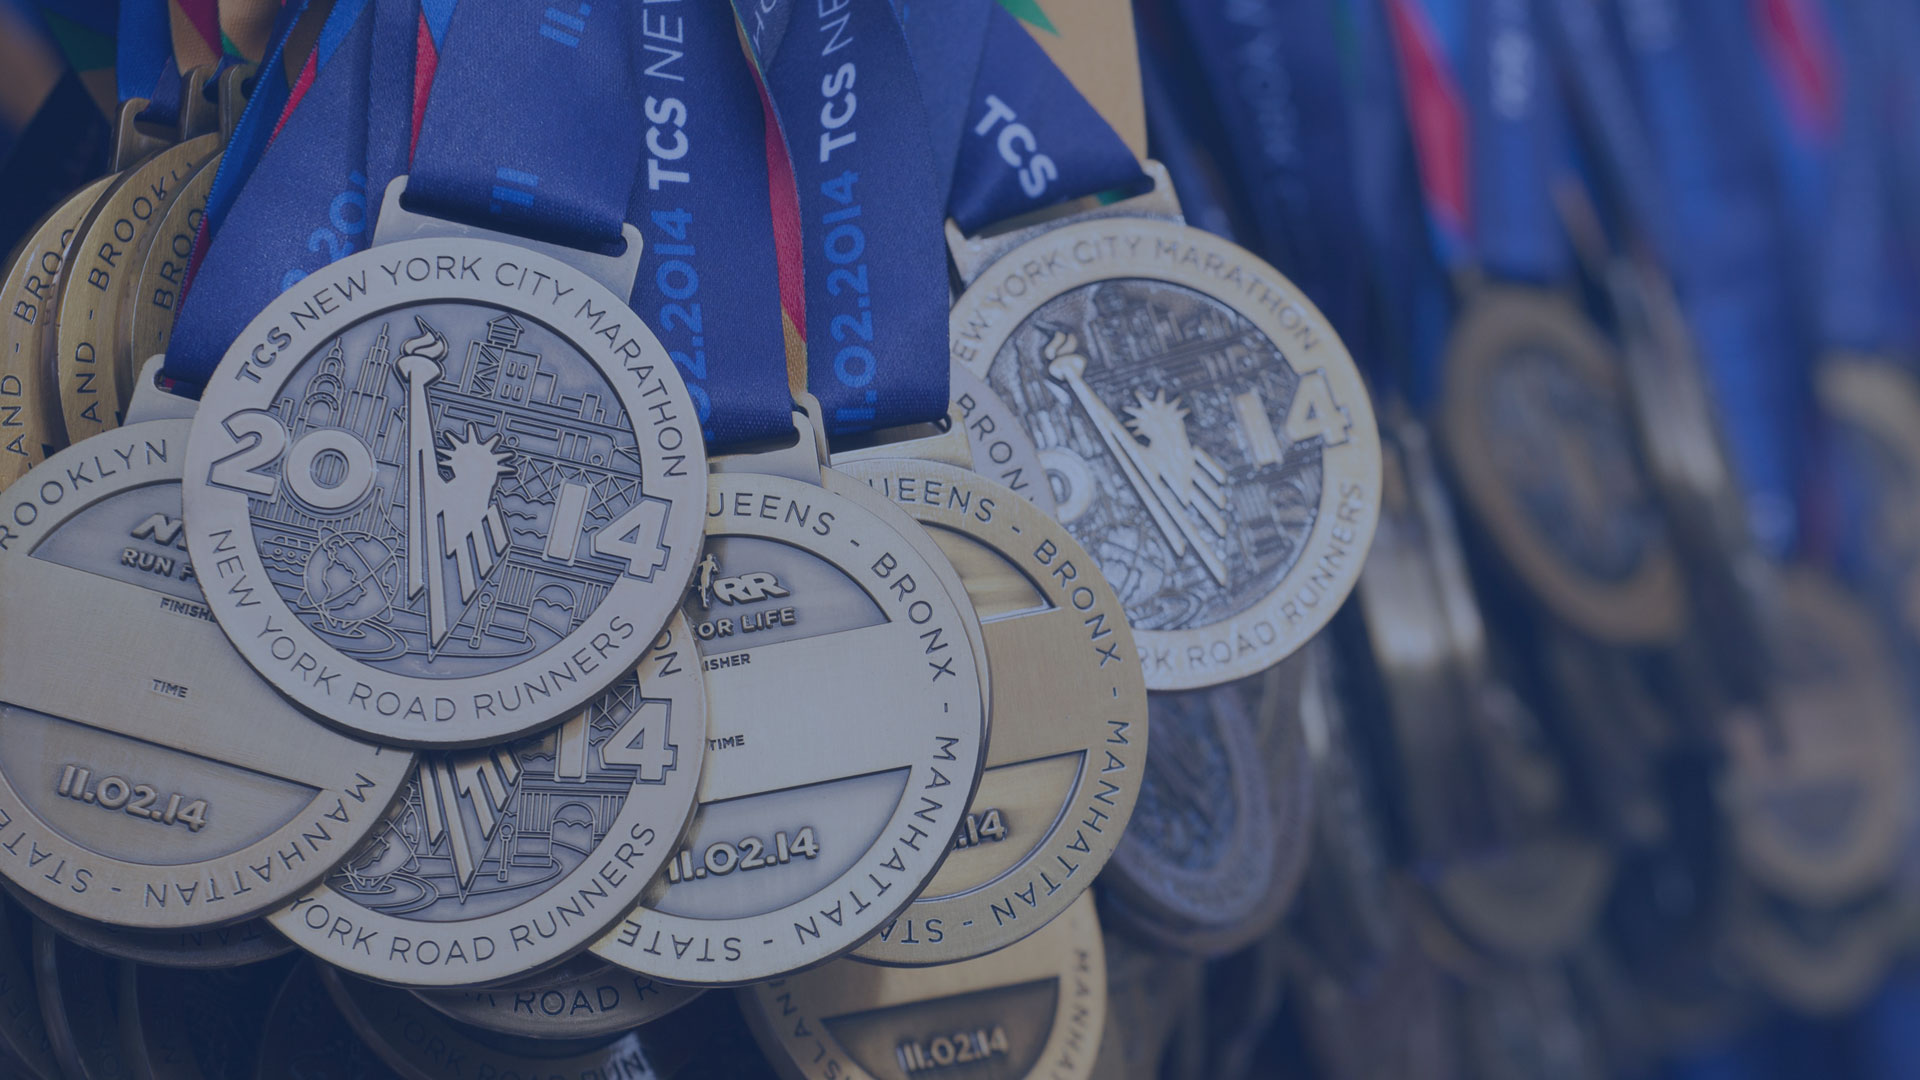 Medals from the TCS New York Marathon